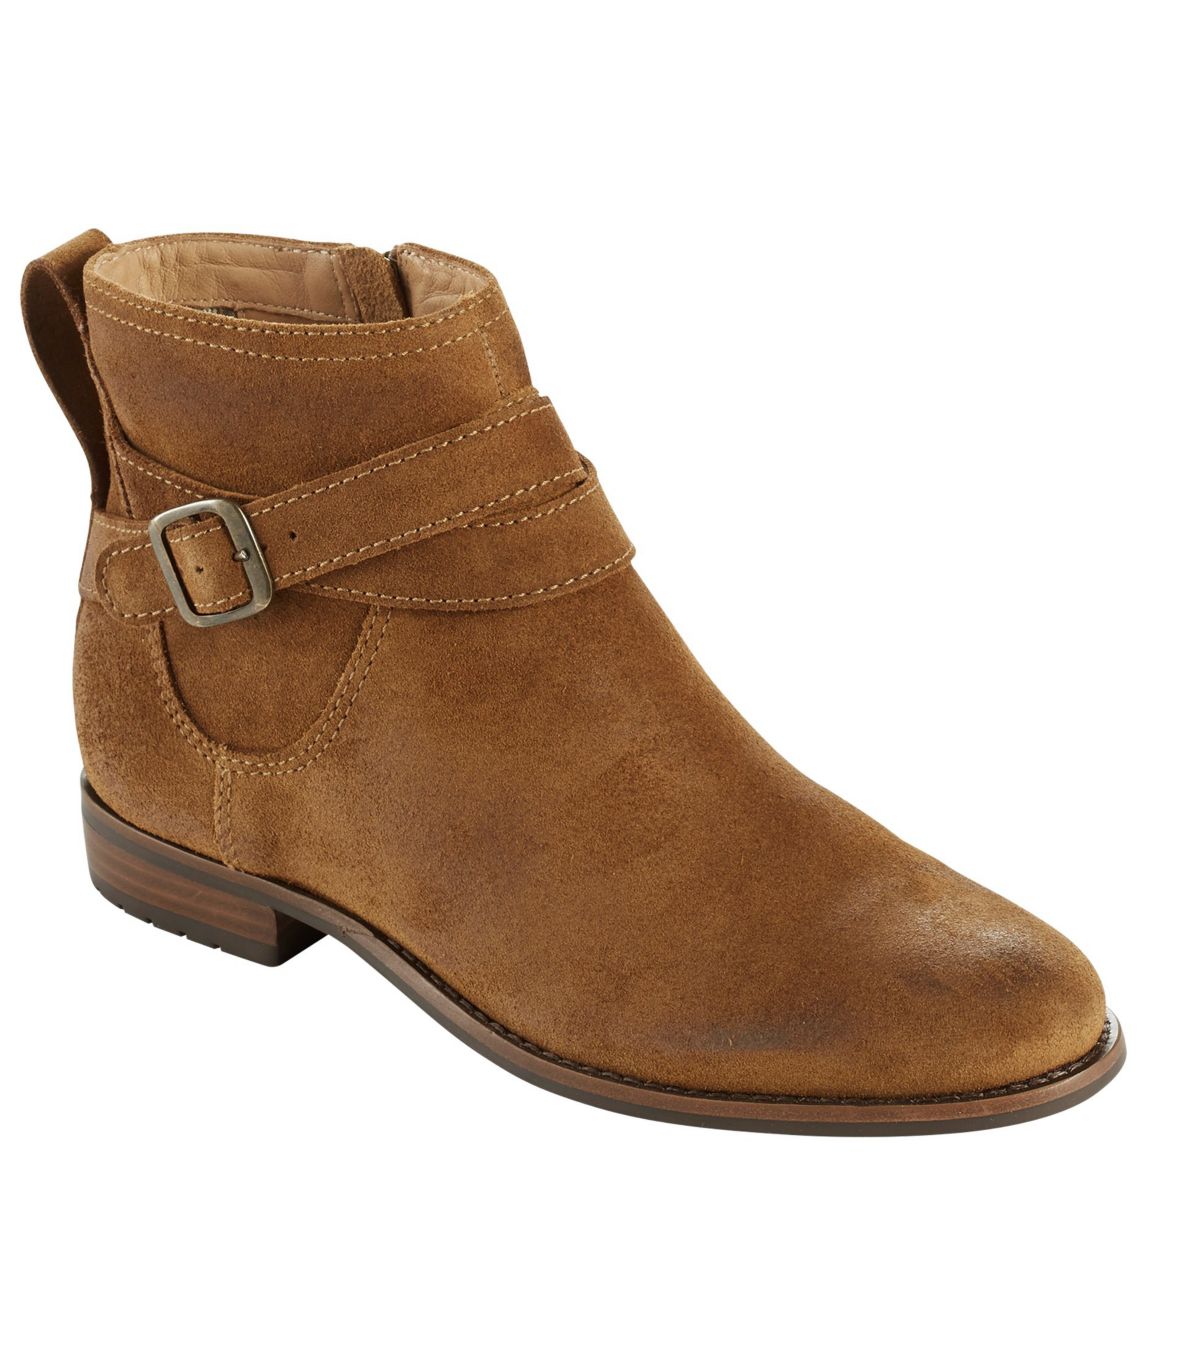 Women's Westport Ankle Strap Boots, Oiled Suede